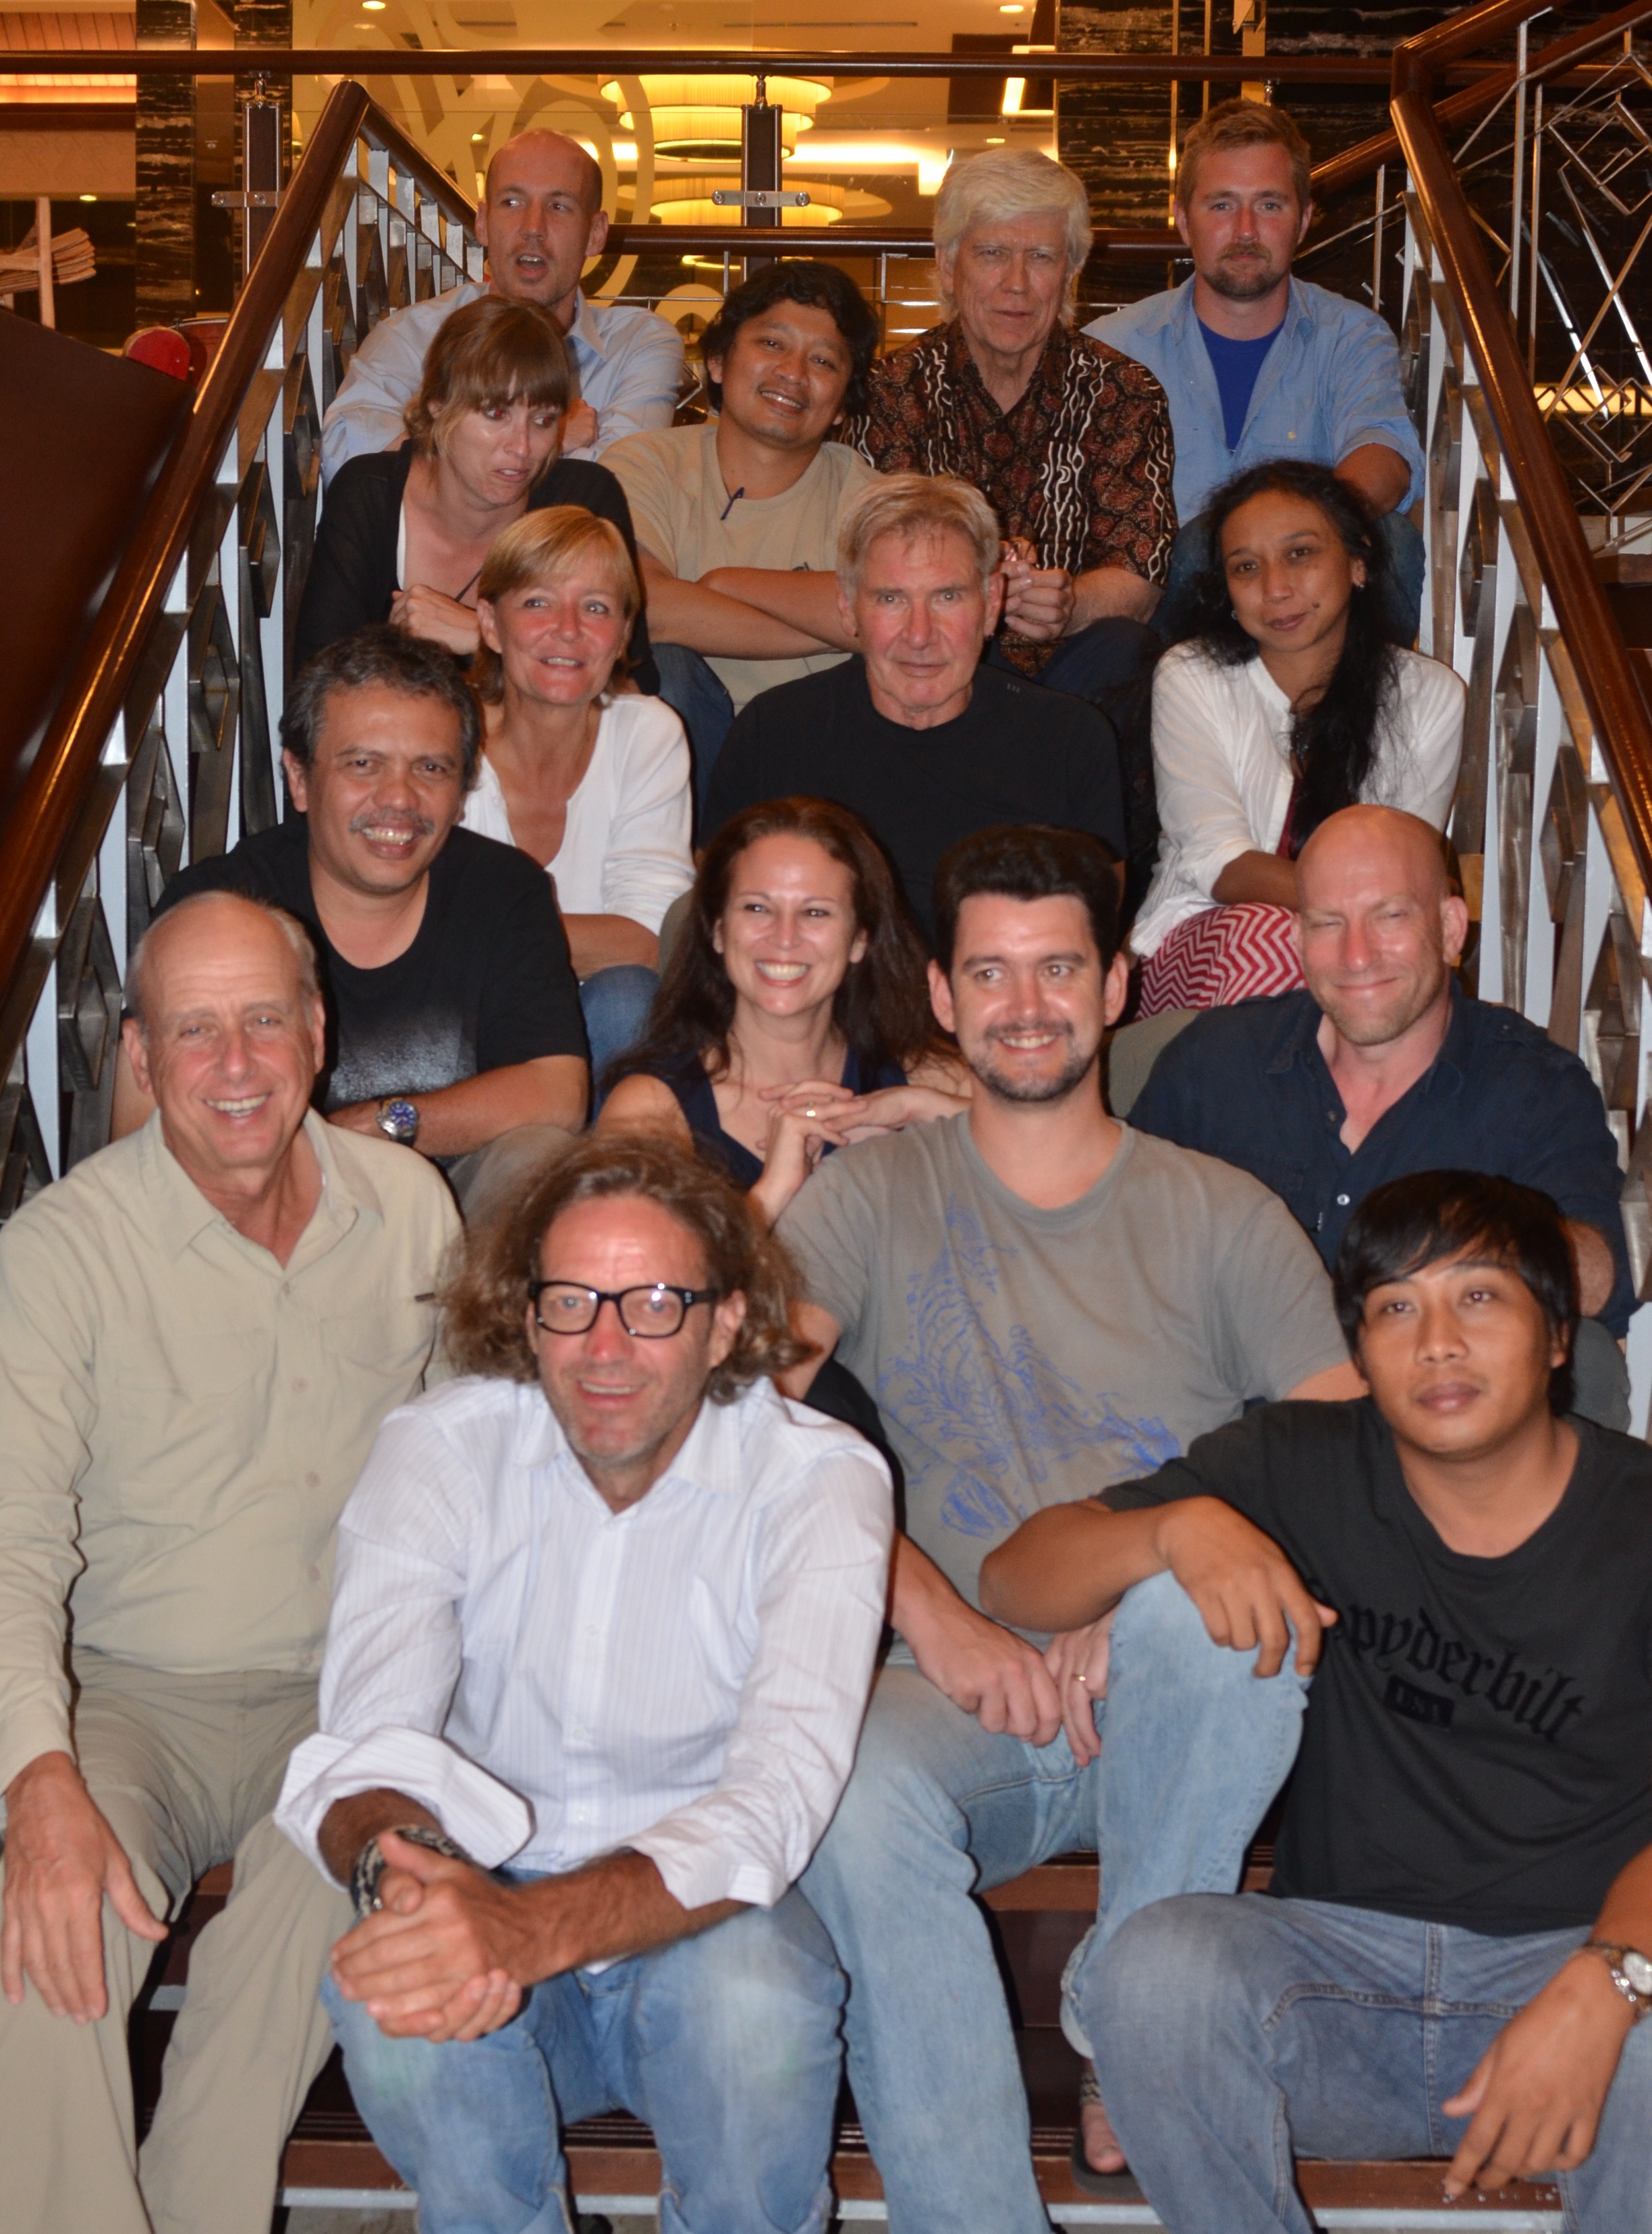 Jeff Horowitz (lower left) with Harrison Ford and Years crew in Indonesia.